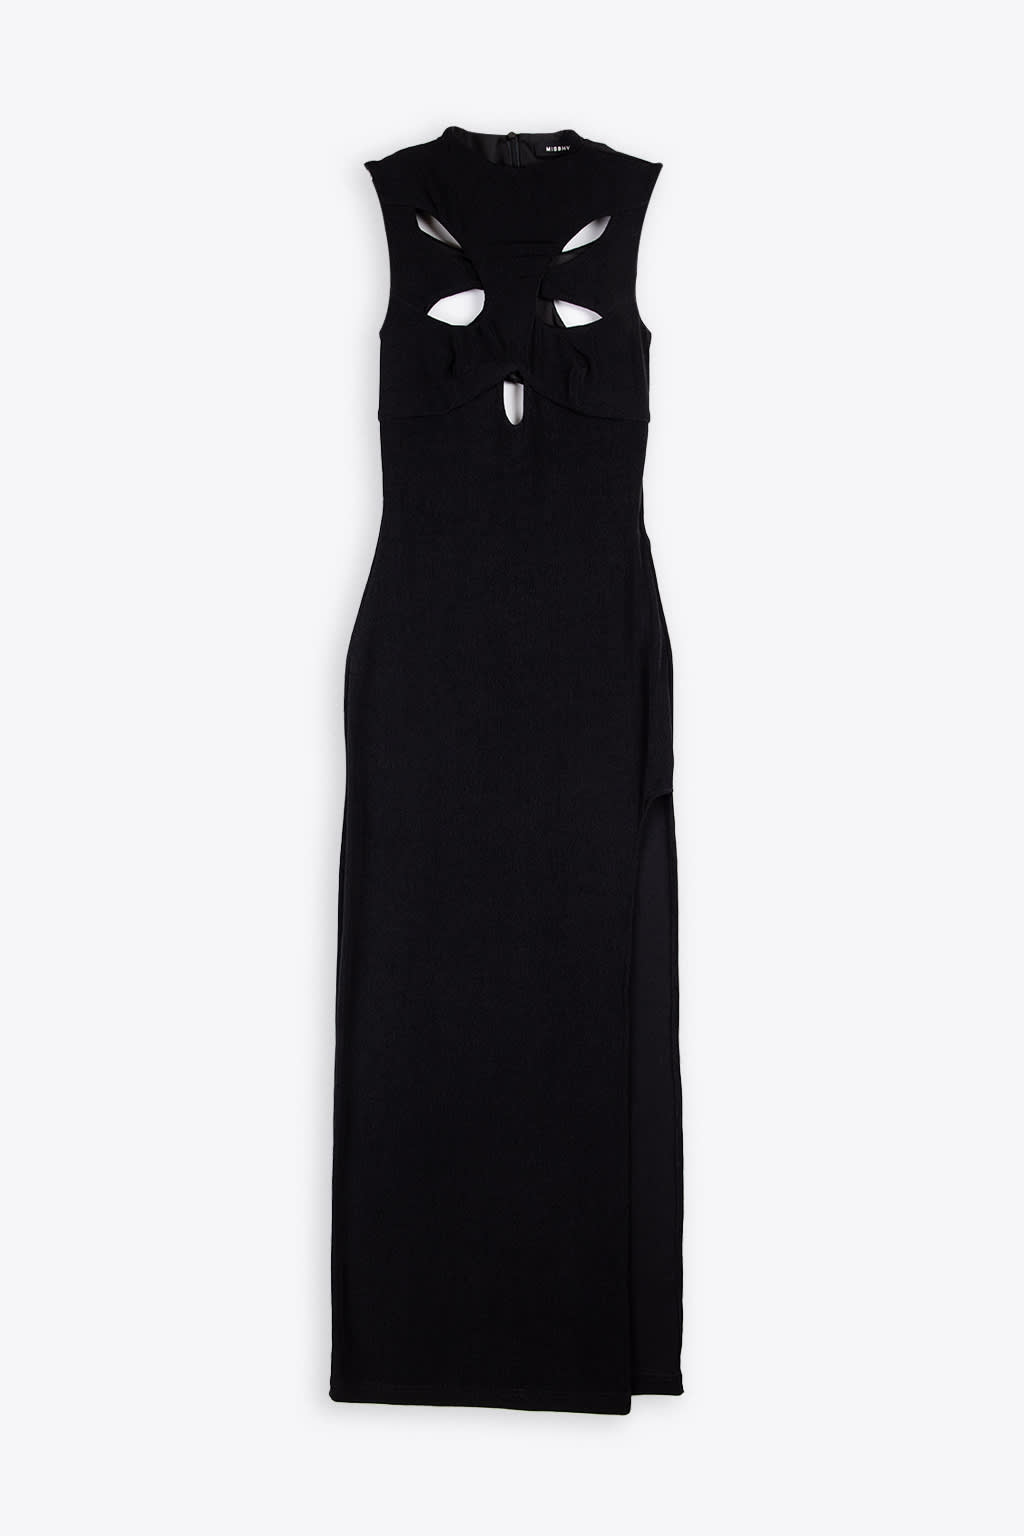 MISBHV Butterfly Cut Out Maxi Dress Sleeveless long black dress with side slit - Butterfly cut out maxi dress